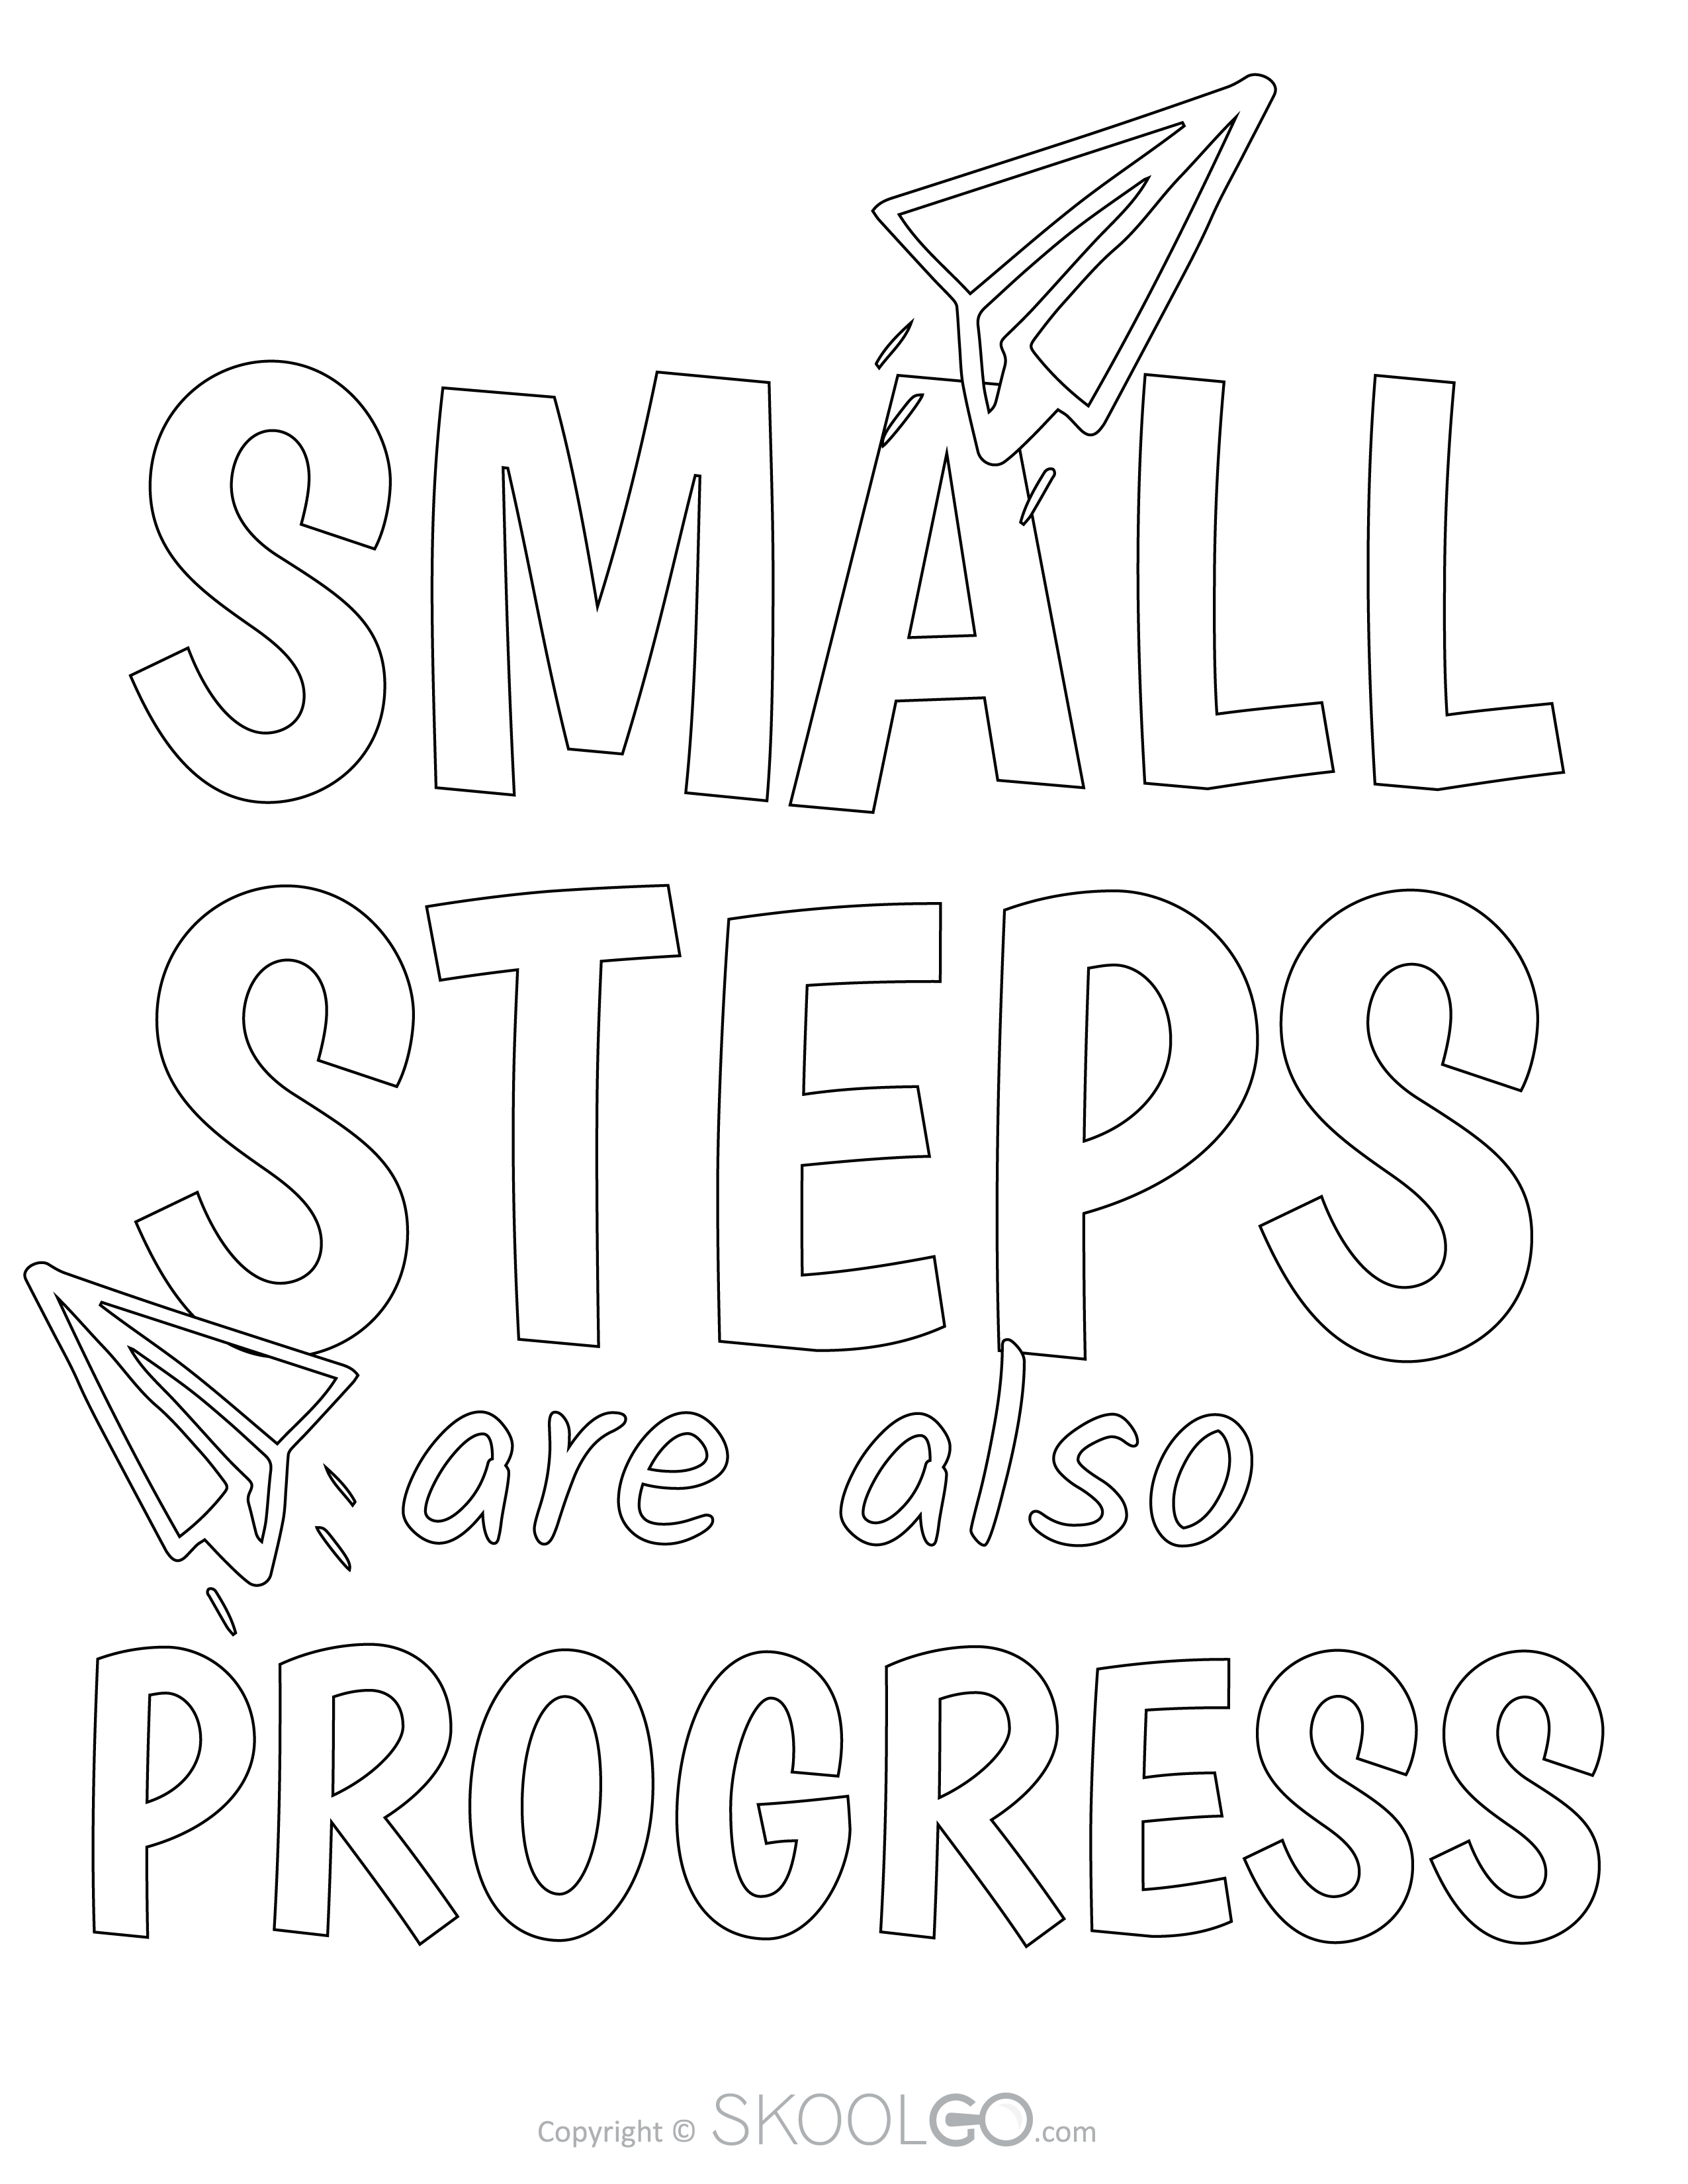 Small Steps Are Also Progress - Free Classroom Poster Coloring Version